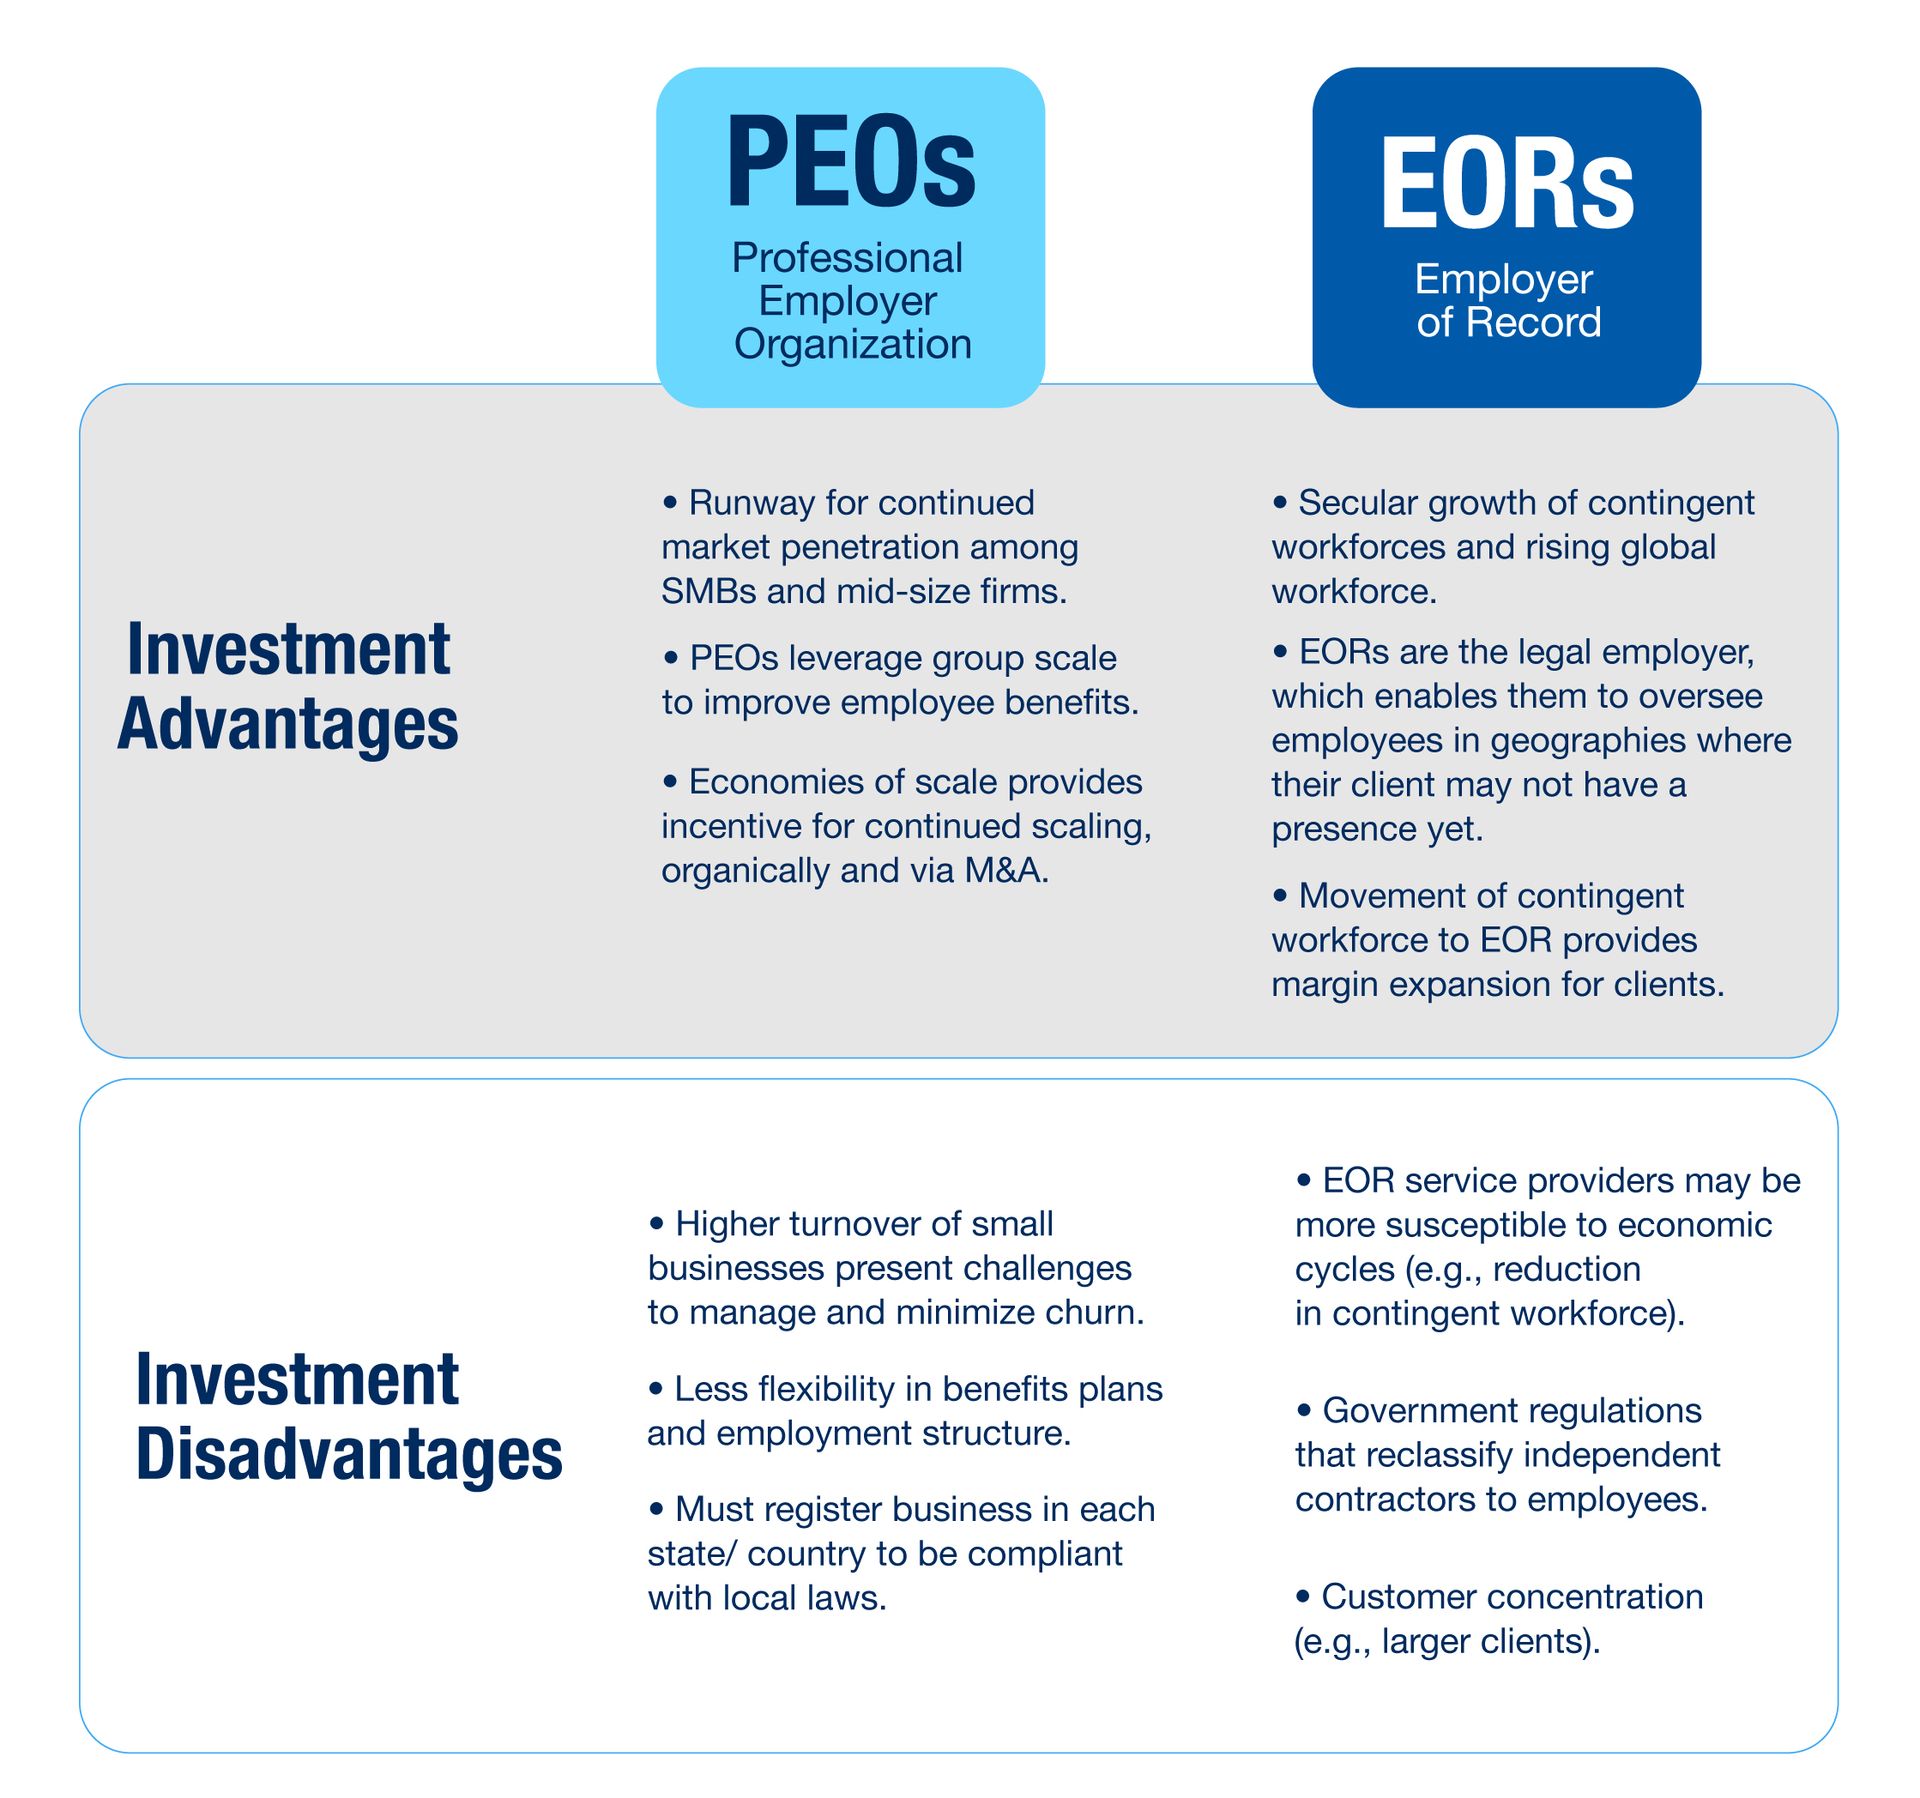 A graphic laying out the investment advantages and disadvantages for PEOs (professional employer organization) and EORs (employer of records).